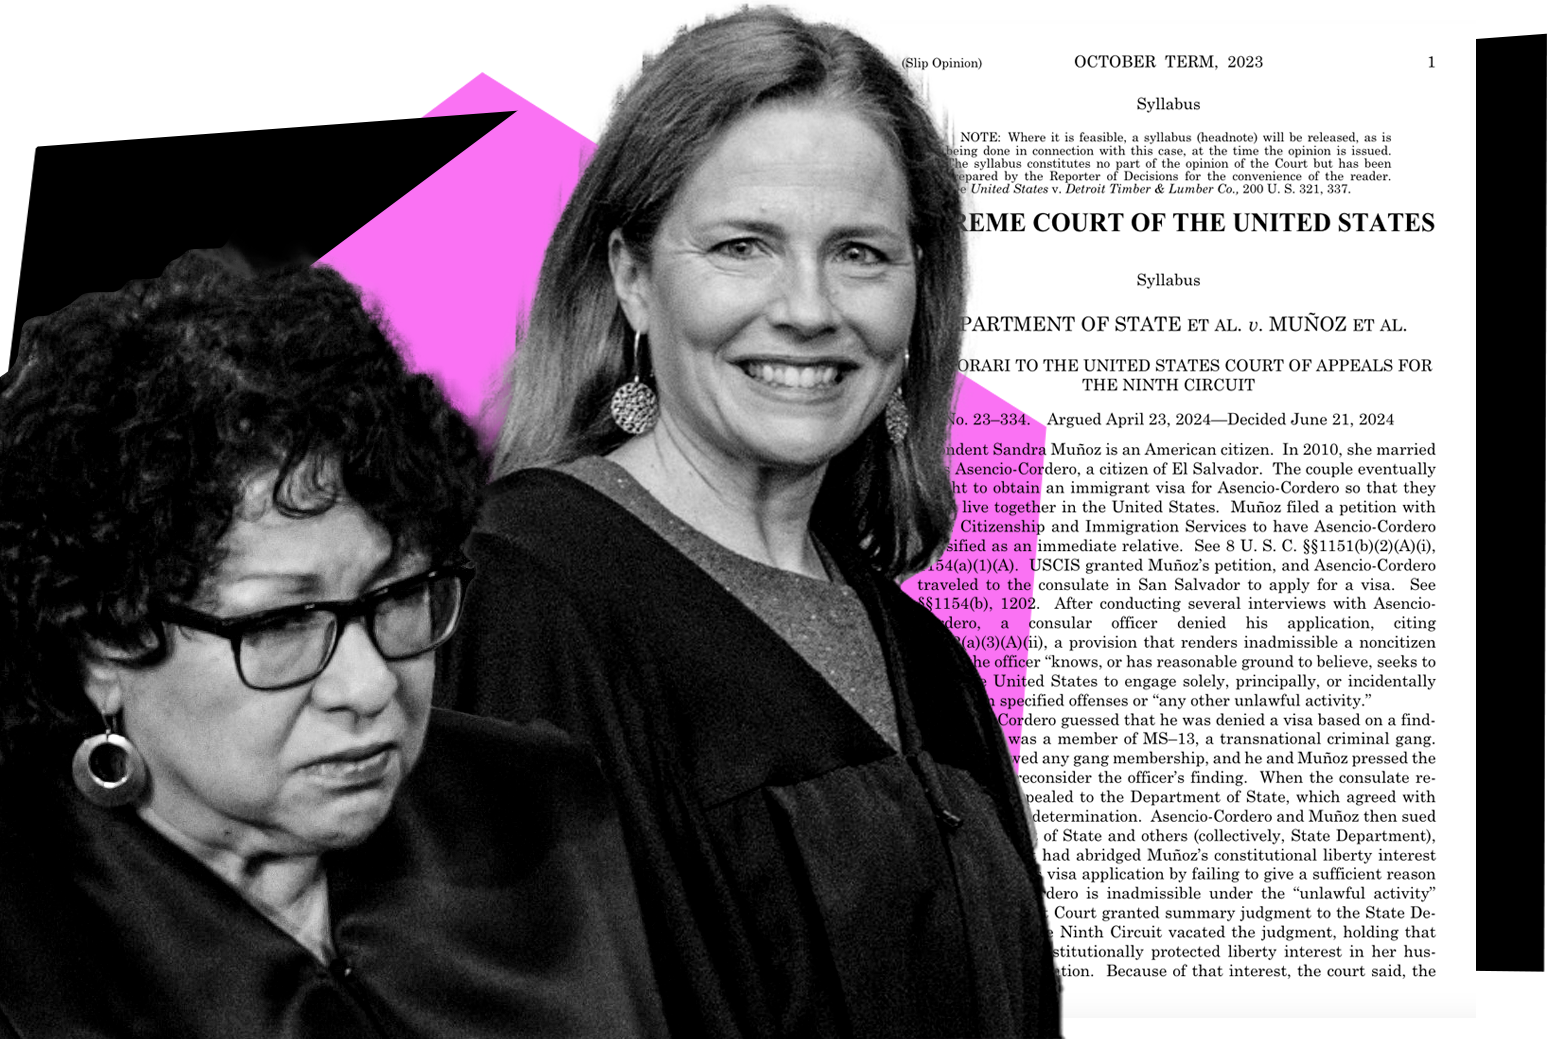 Sonia Sotomayor and Amy Coney Barrett in collage with text from the opinion.